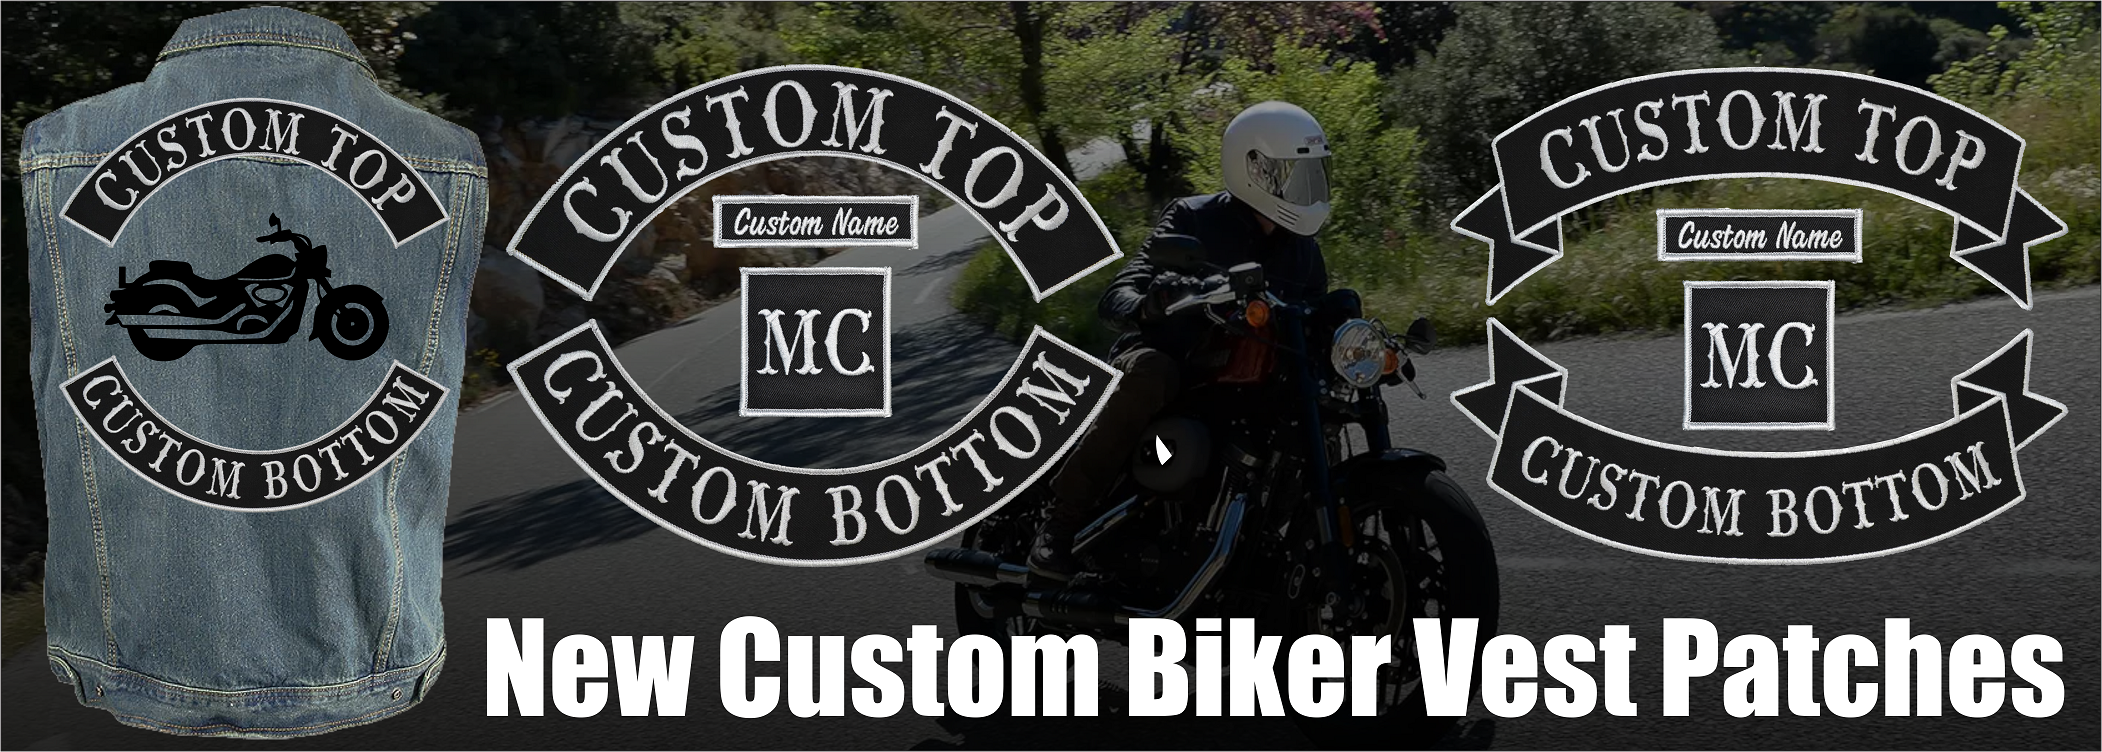 Ready to ride? New Custom Biker Patches, Made to Order